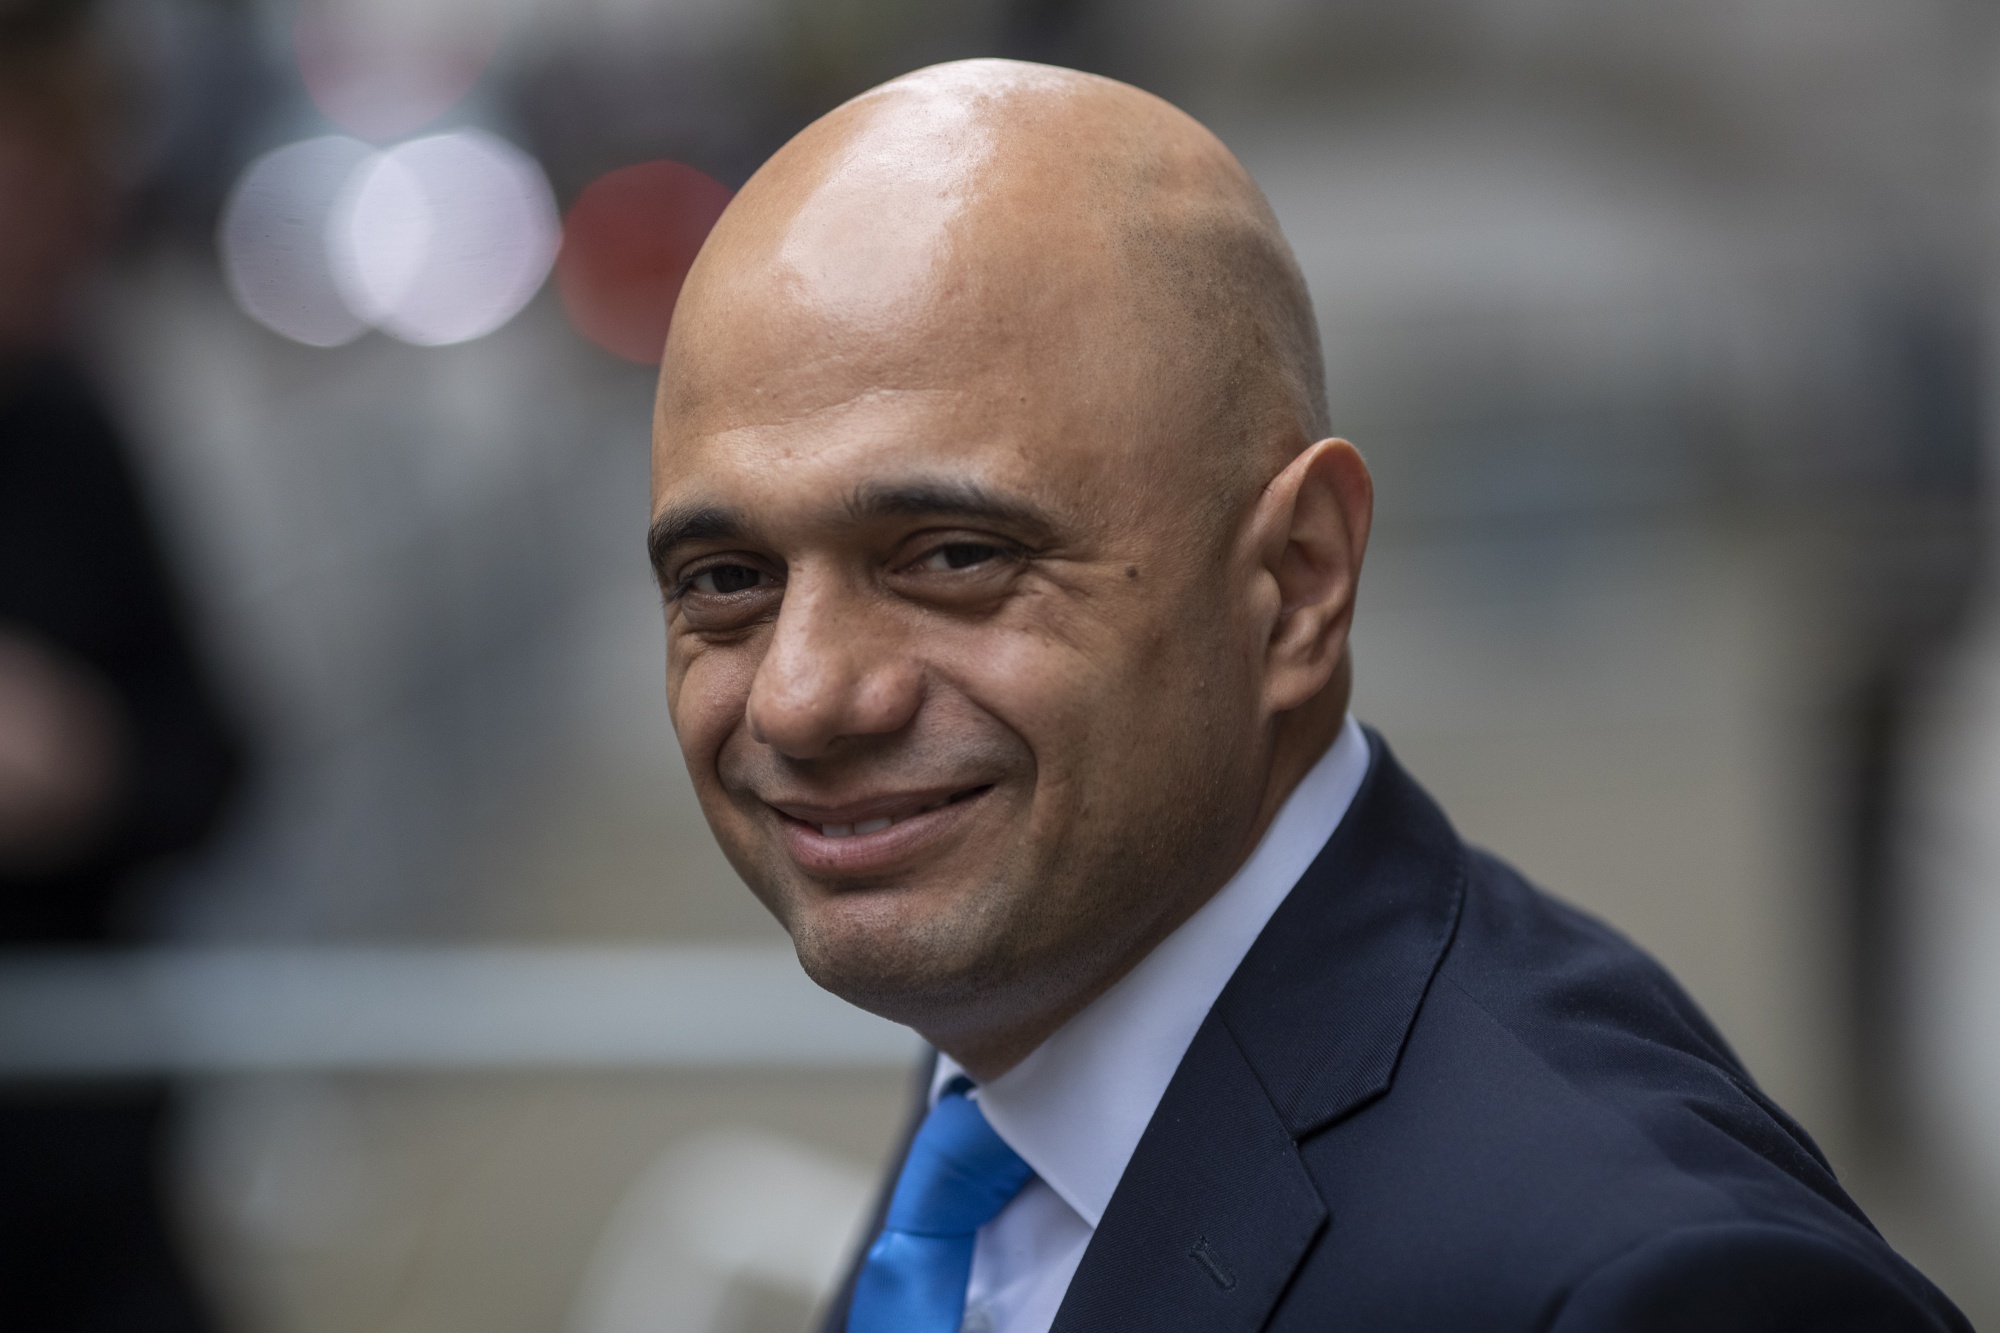 Sajid Javid is out, but the Brexit hardball could unfortunately continue.